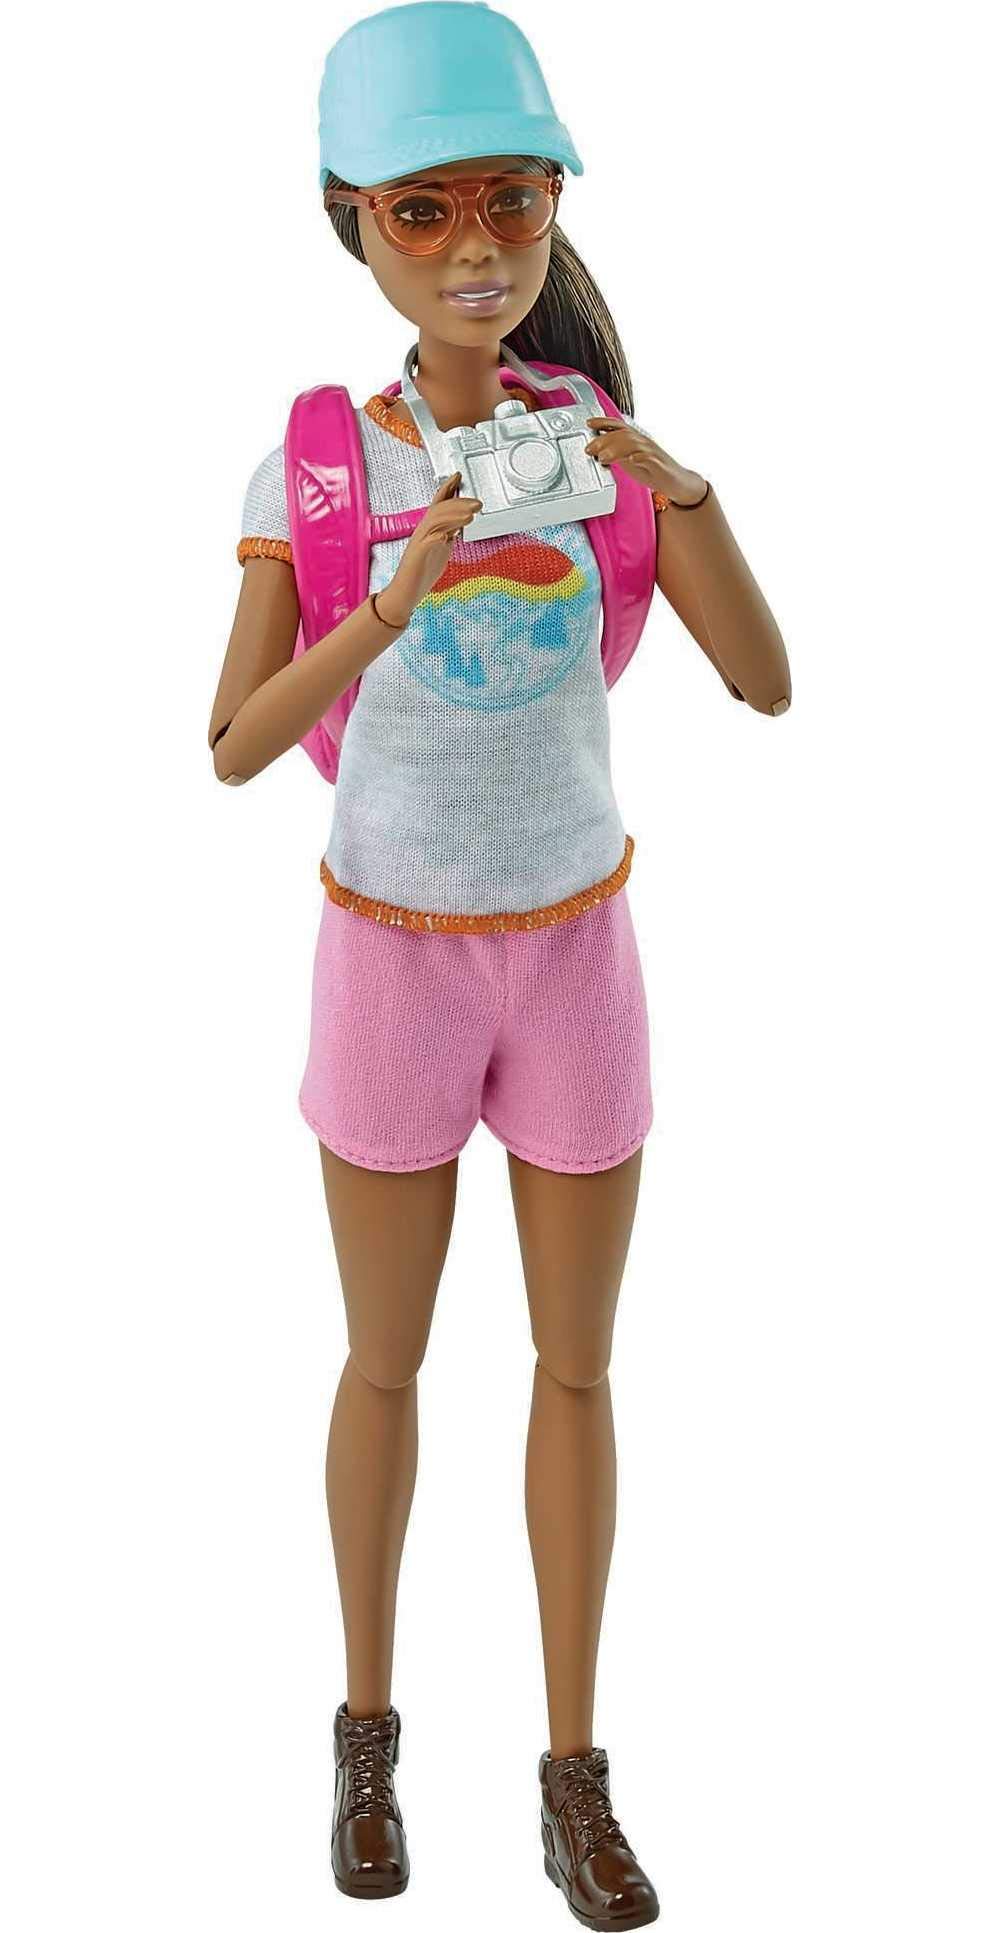 Barbie Hiking Doll, Brunette, with Puppy & 9 Accessories, Including Backpack Pet Carrier, Map, Camera & More, Gift for Kids 3 to 7 Years Old